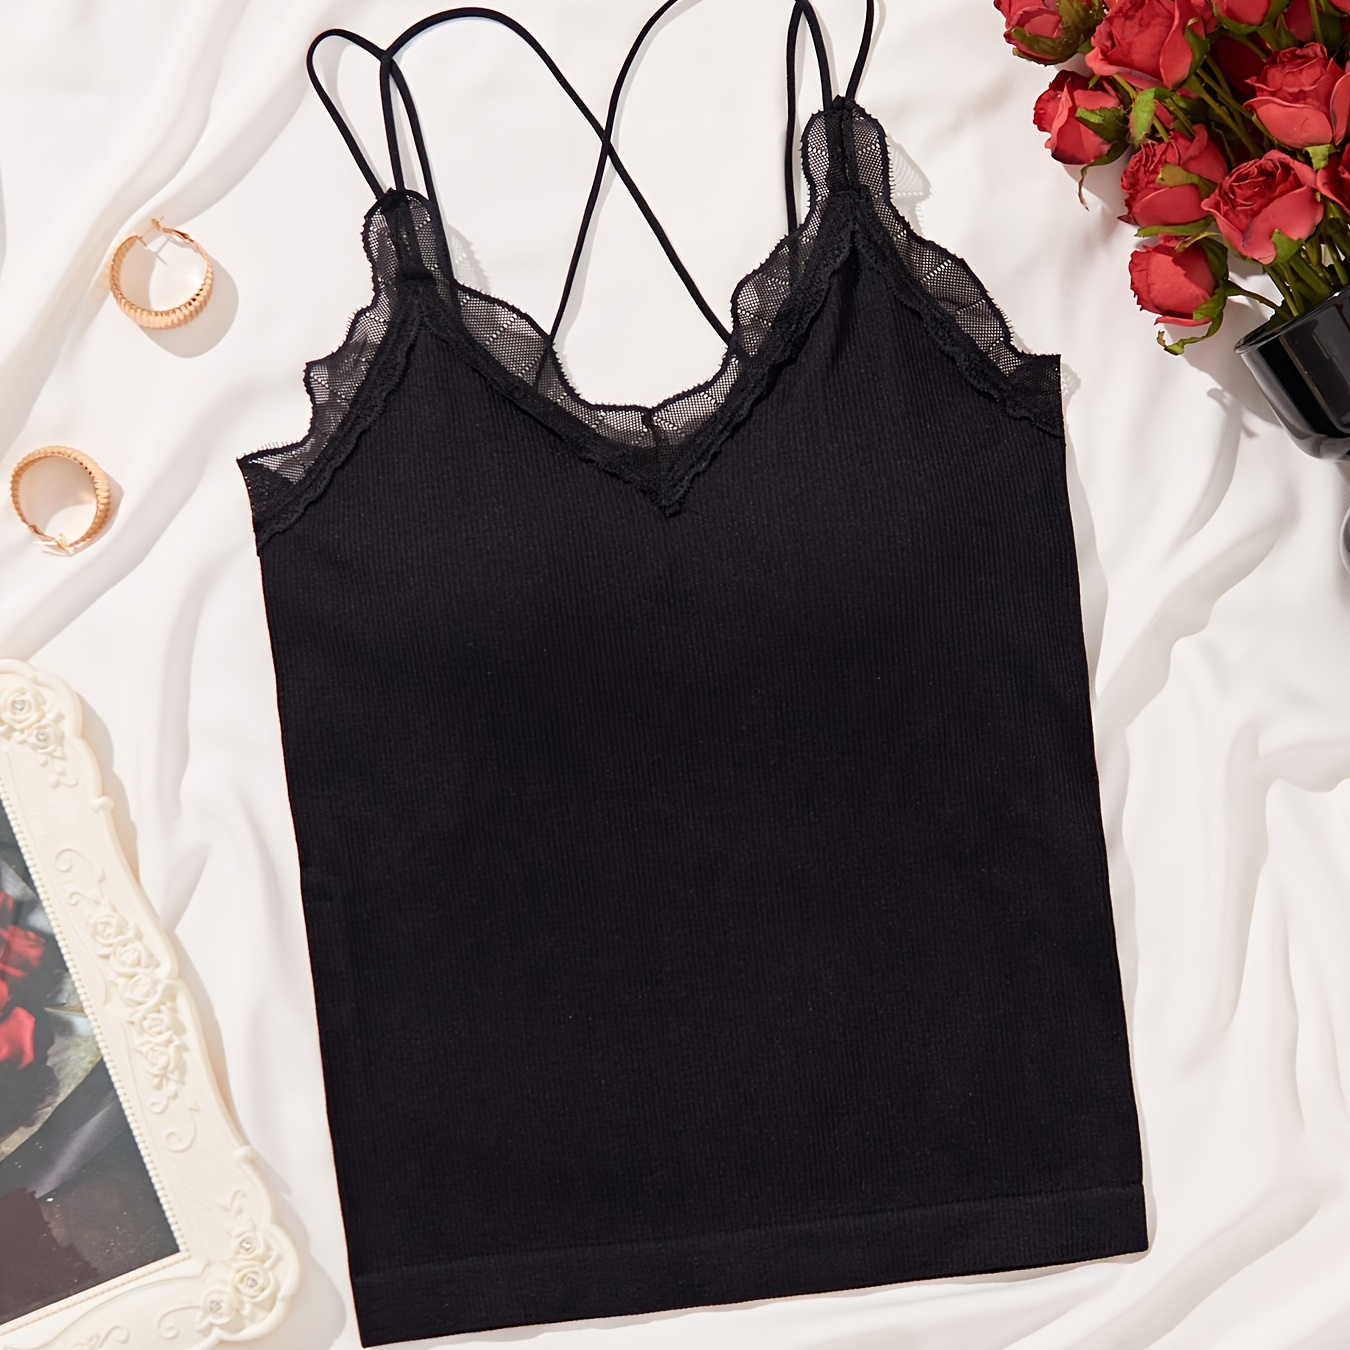 

Women's Lace Trim Seamless Camisole With Built-in Bra, Romantic Style 2-in-1 Spaghetti Strap Tank Top, Black, Breathable Fabric, Versatile Innerwear Or Outerwear